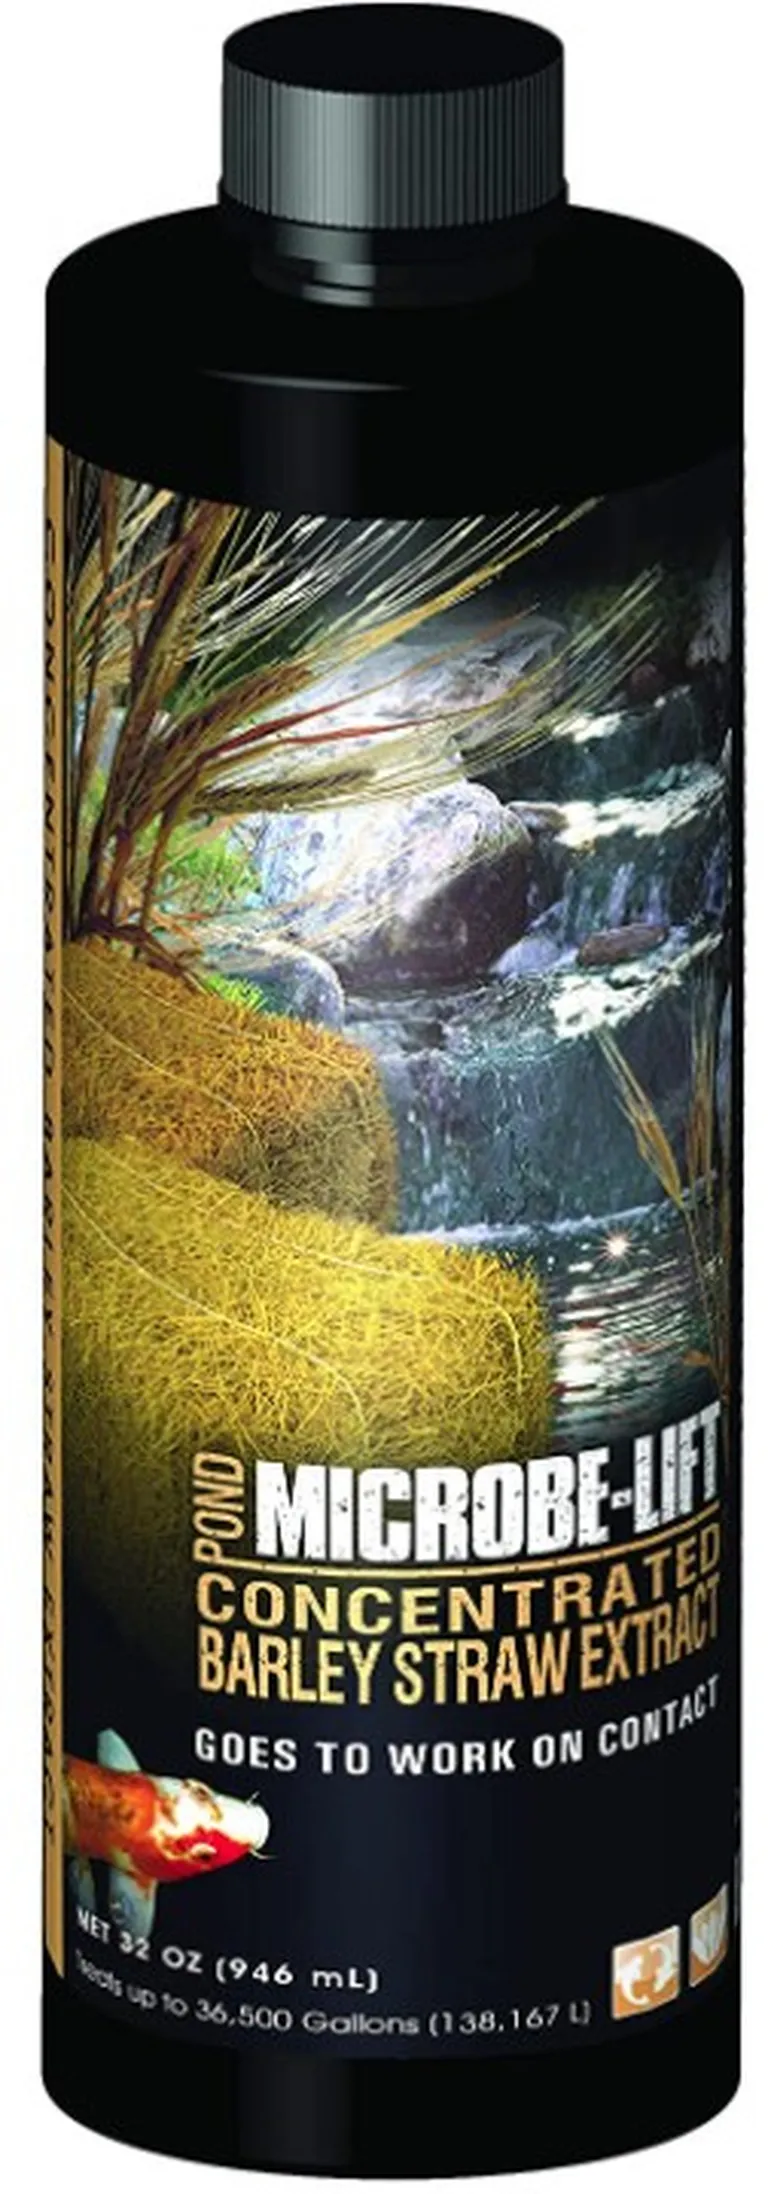 Microbe-Lift Barley Straw Concentrated Extract Photo 2